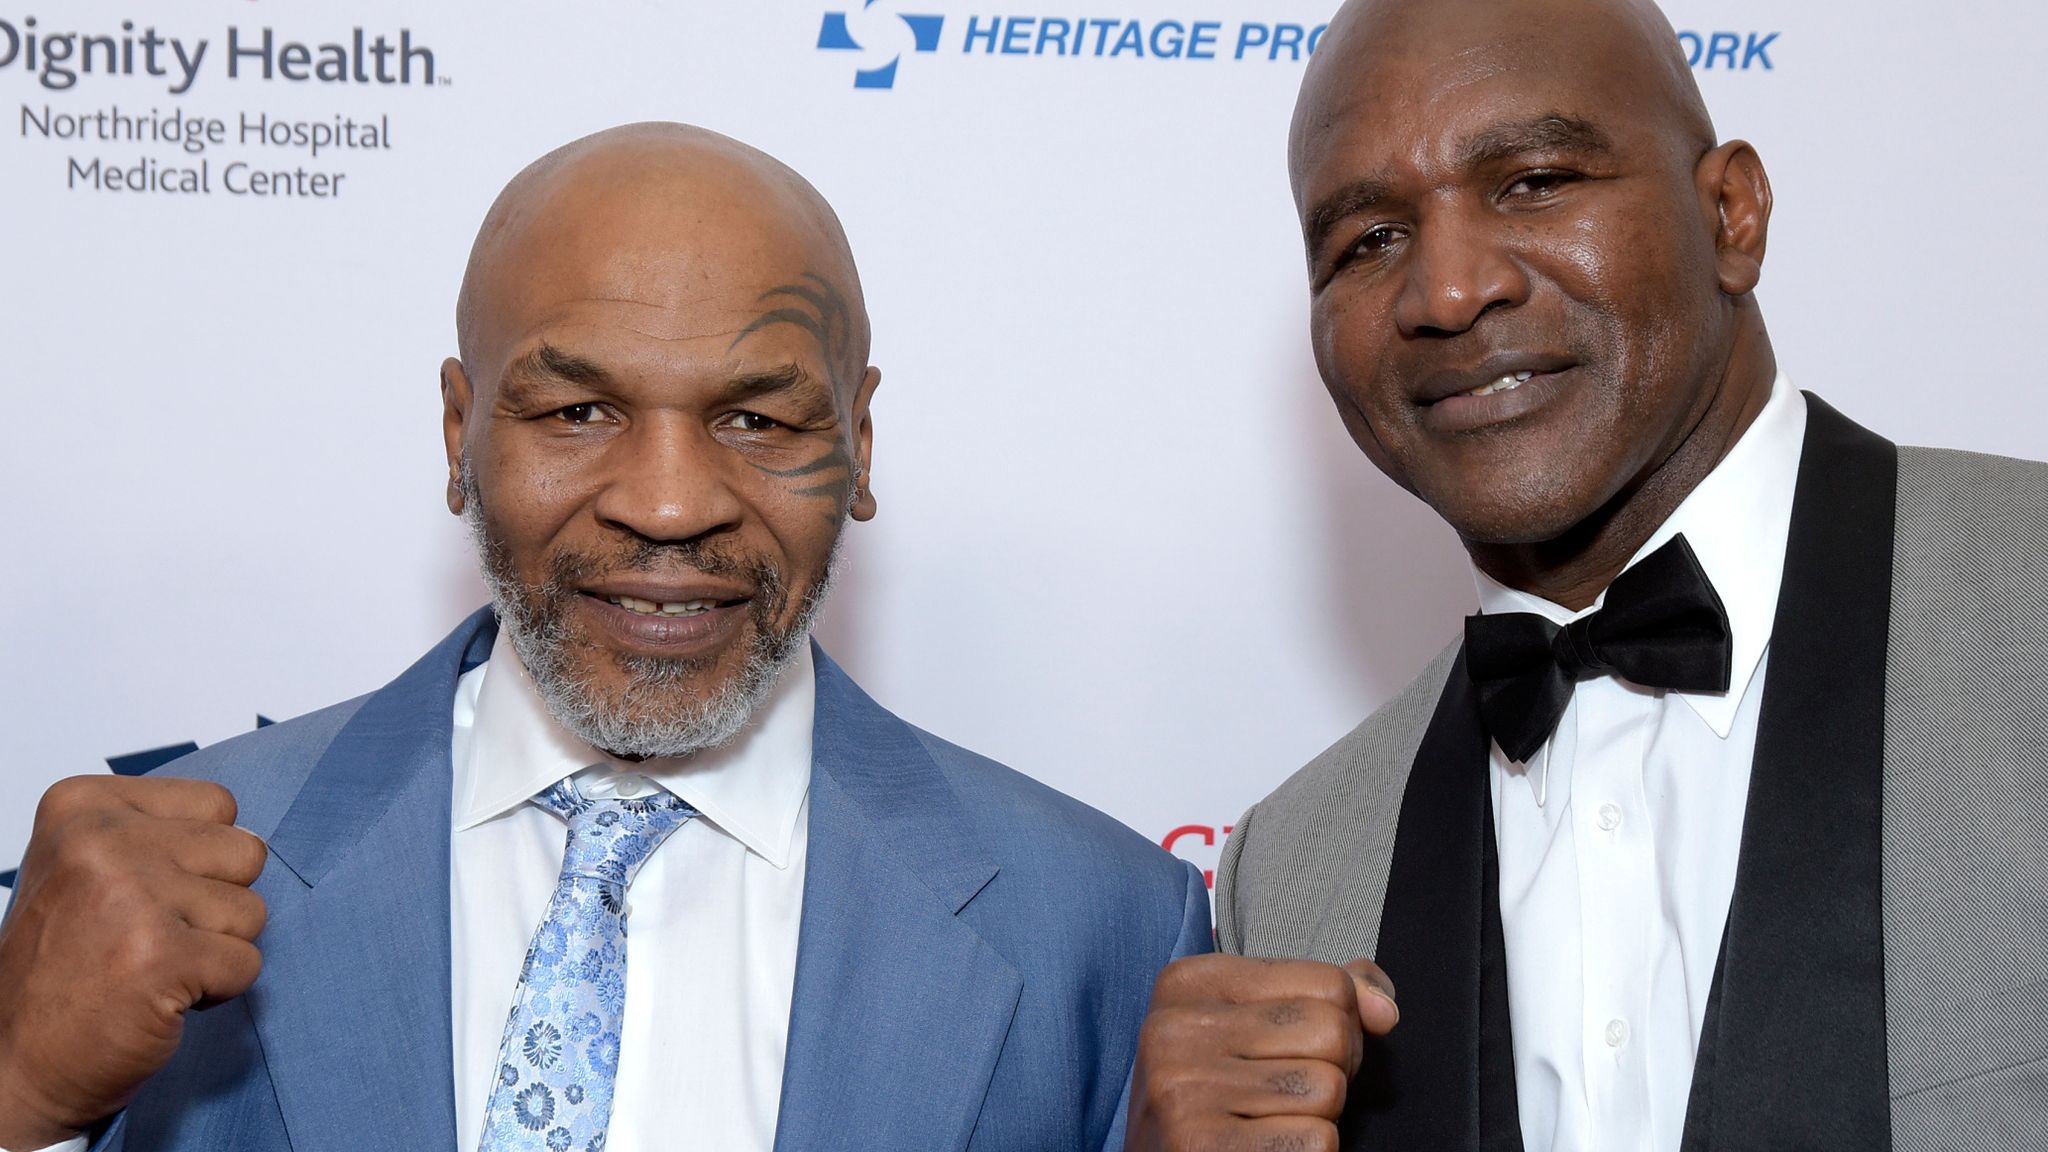 Evander Holyfield confirms 'good chance' of Mike Tyson trilogy fight with  both in 50s and predicts one will be KOd – The Sun